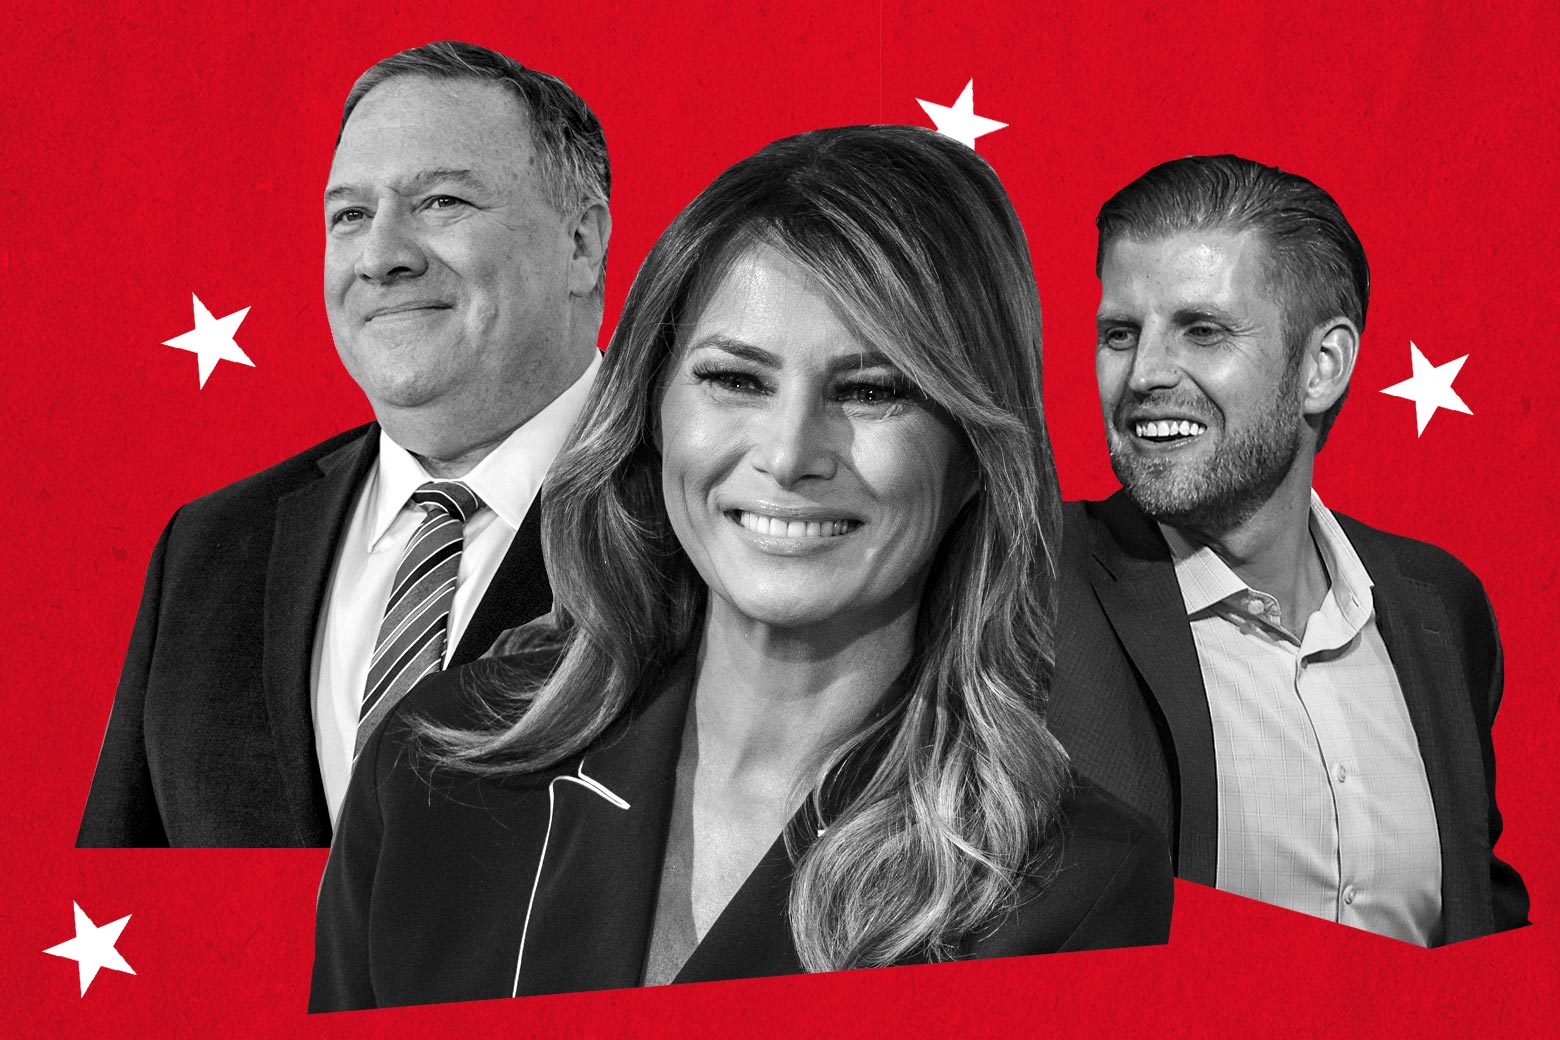 Mike Pompeo, Melania Trump, and Eric Trump seen on a red background surrounded by white stars.